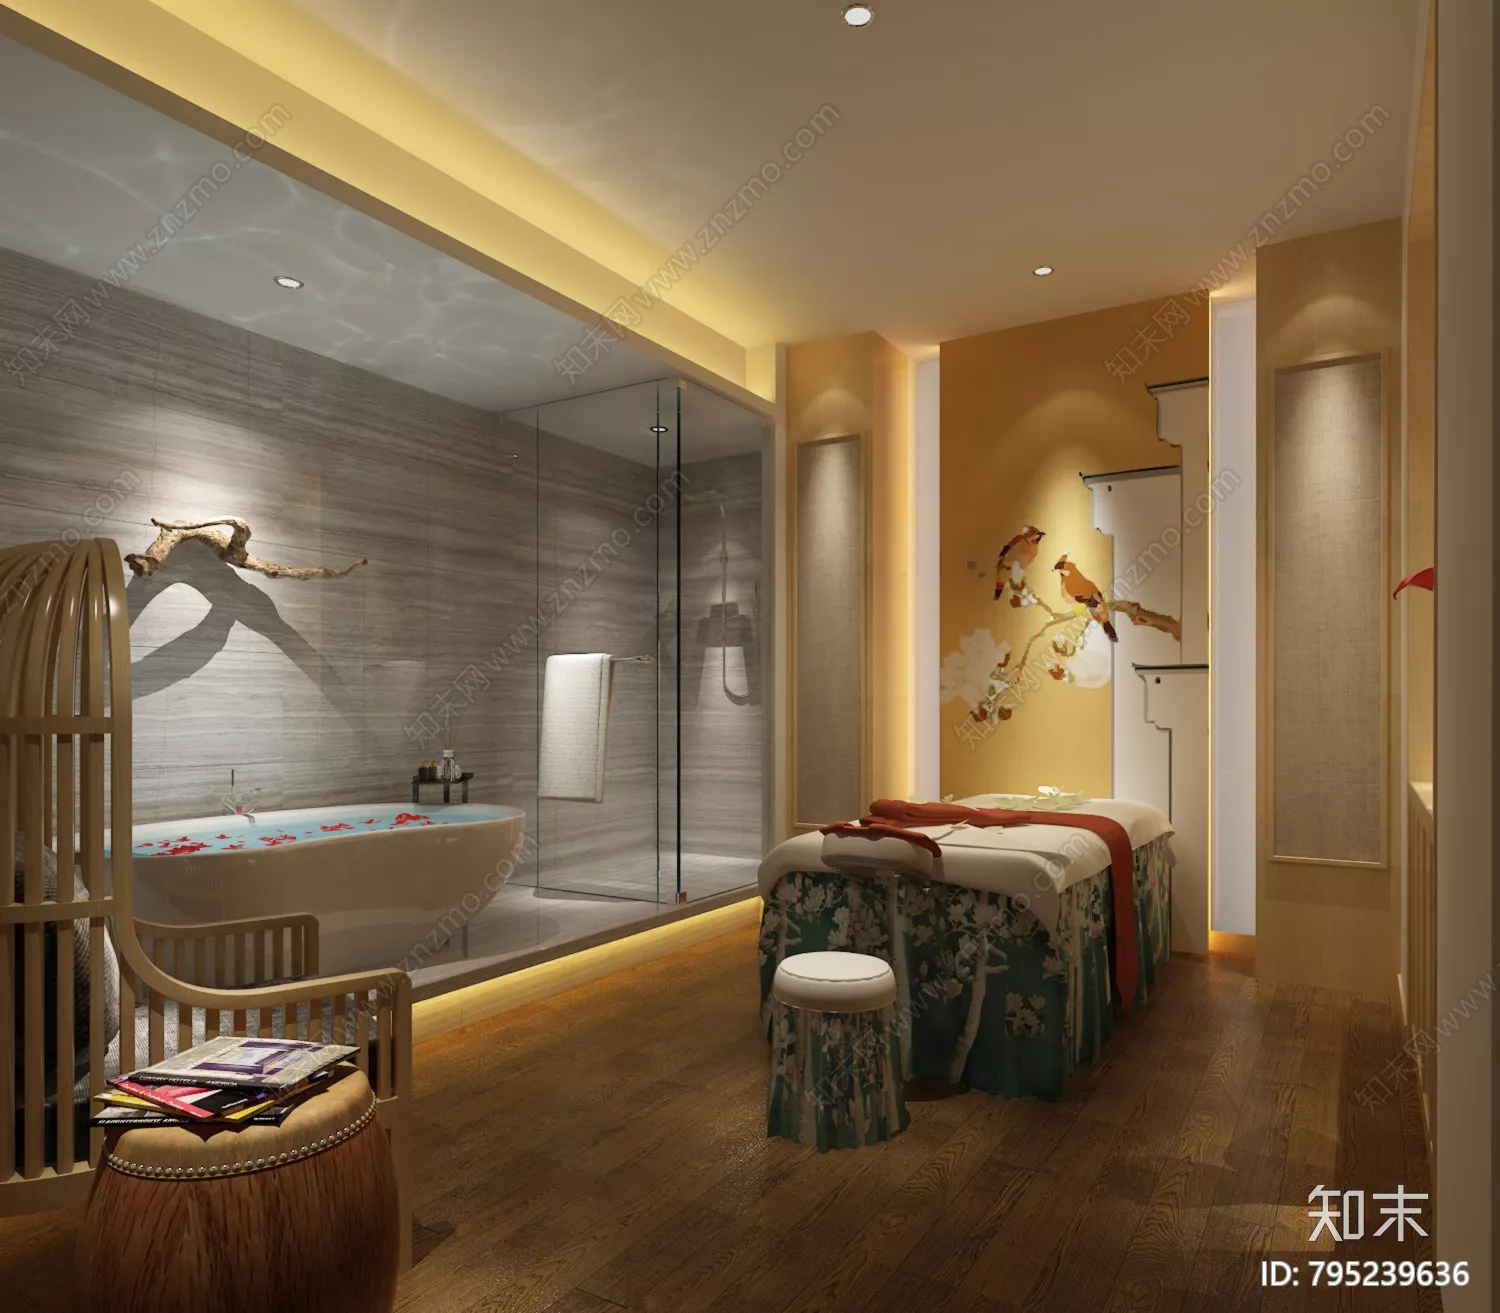 MODERN SPA AND BEAUTY - SKETCHUP 3D SCENE - VRAY OR ENSCAPE - ID13896